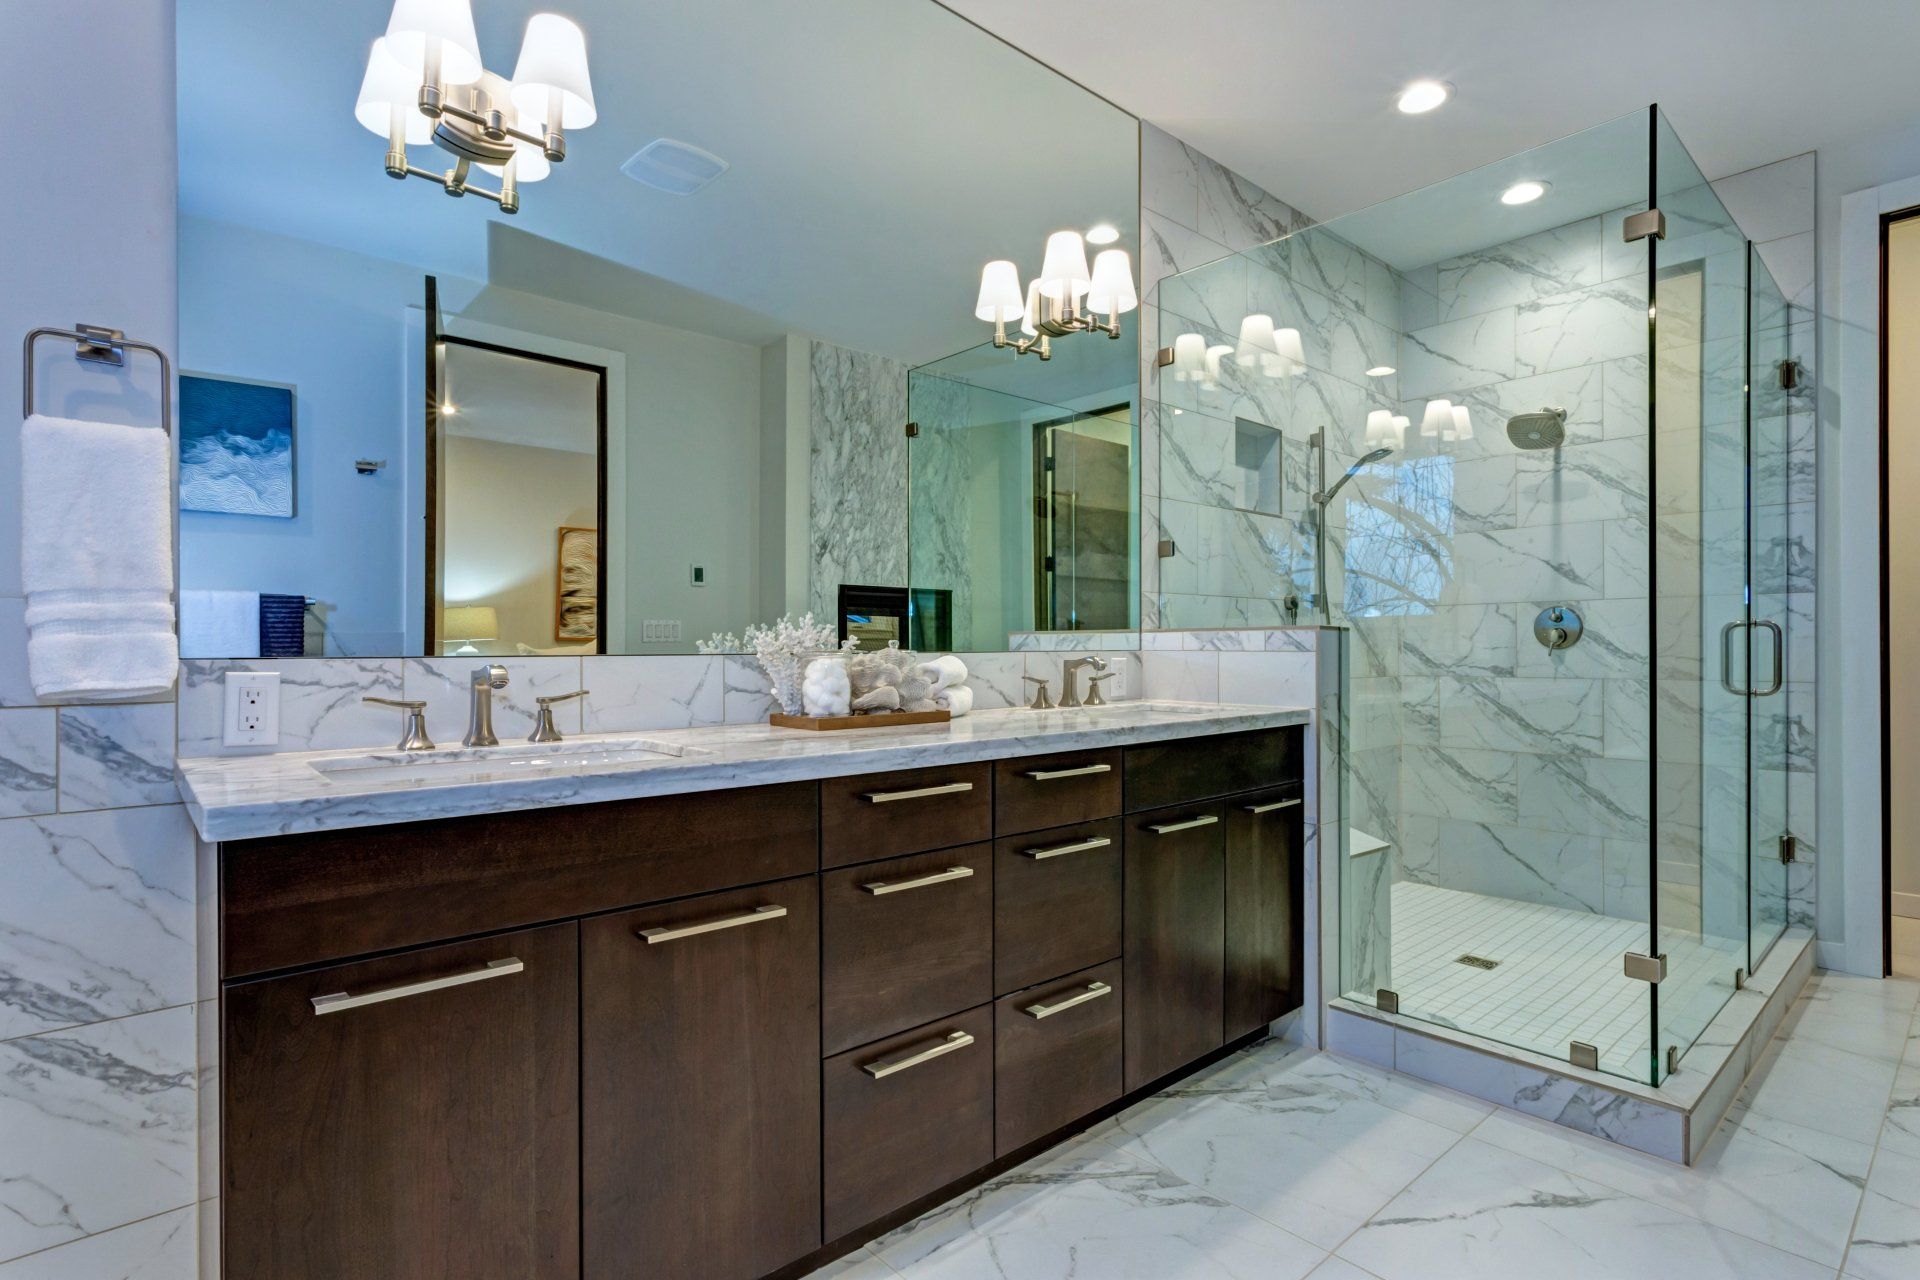 Bathroom mirror and glass shower